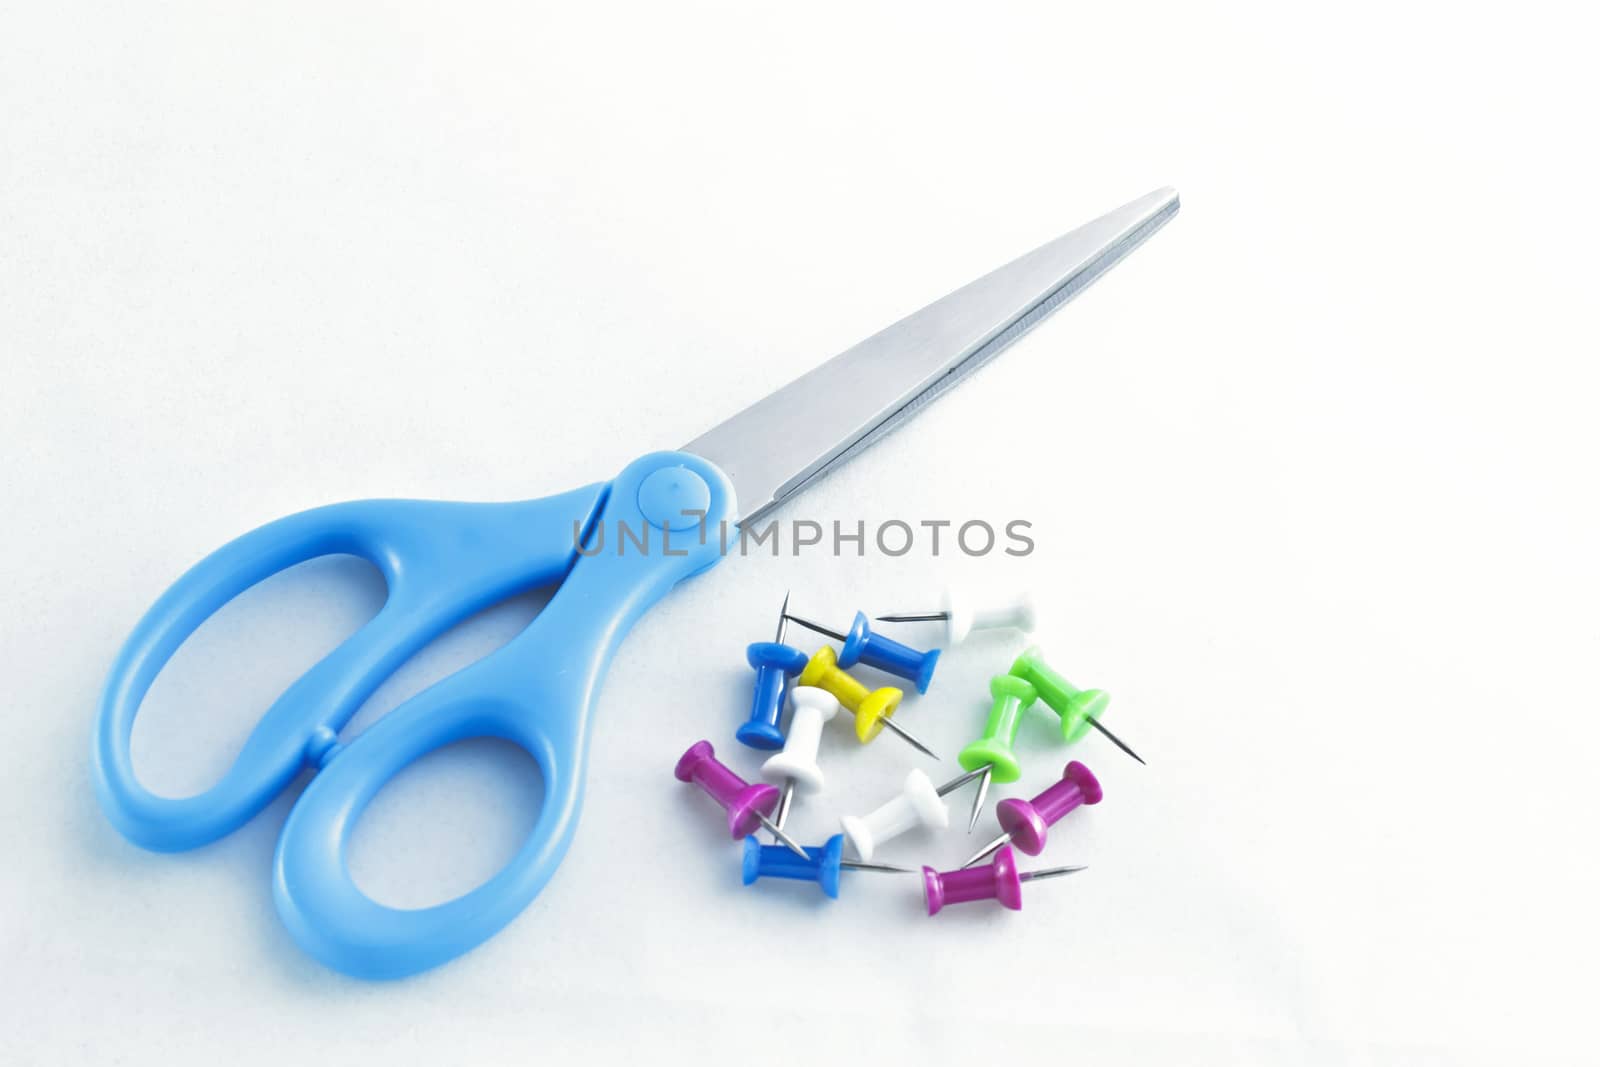 Blue handle scissors lay next to a pile of colorful tacks.